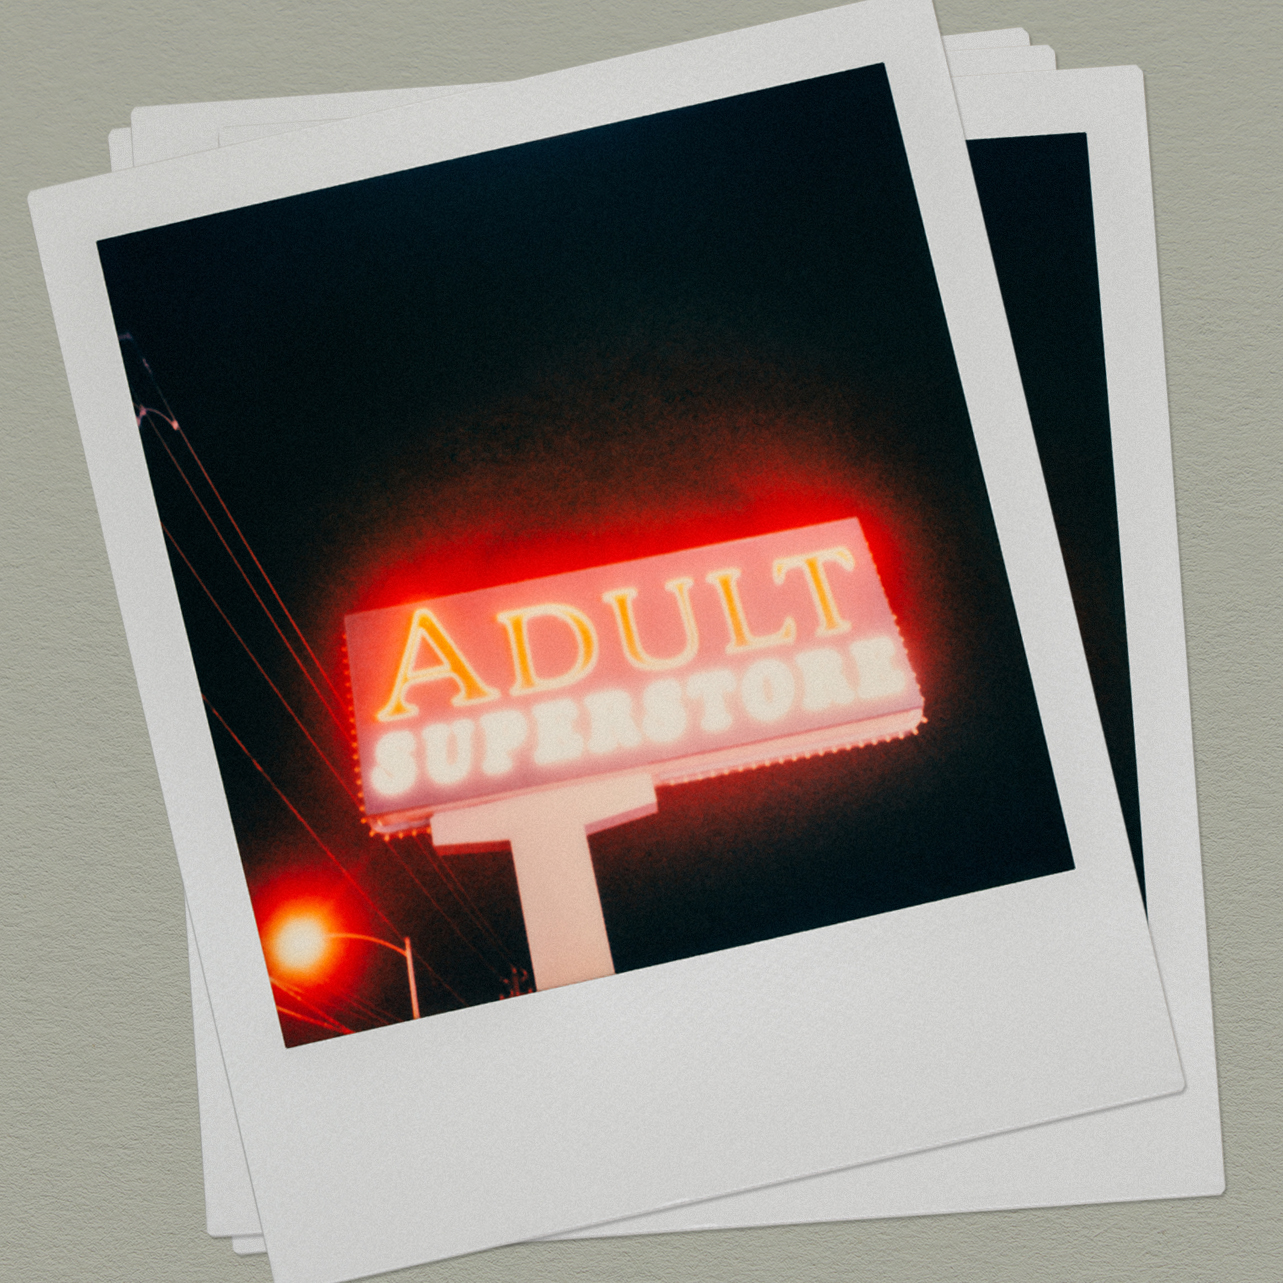 Adult Superstore Sign At Night Shot On Polaroid Long exposure, shot at night on a vintage SX-70 Land camera.